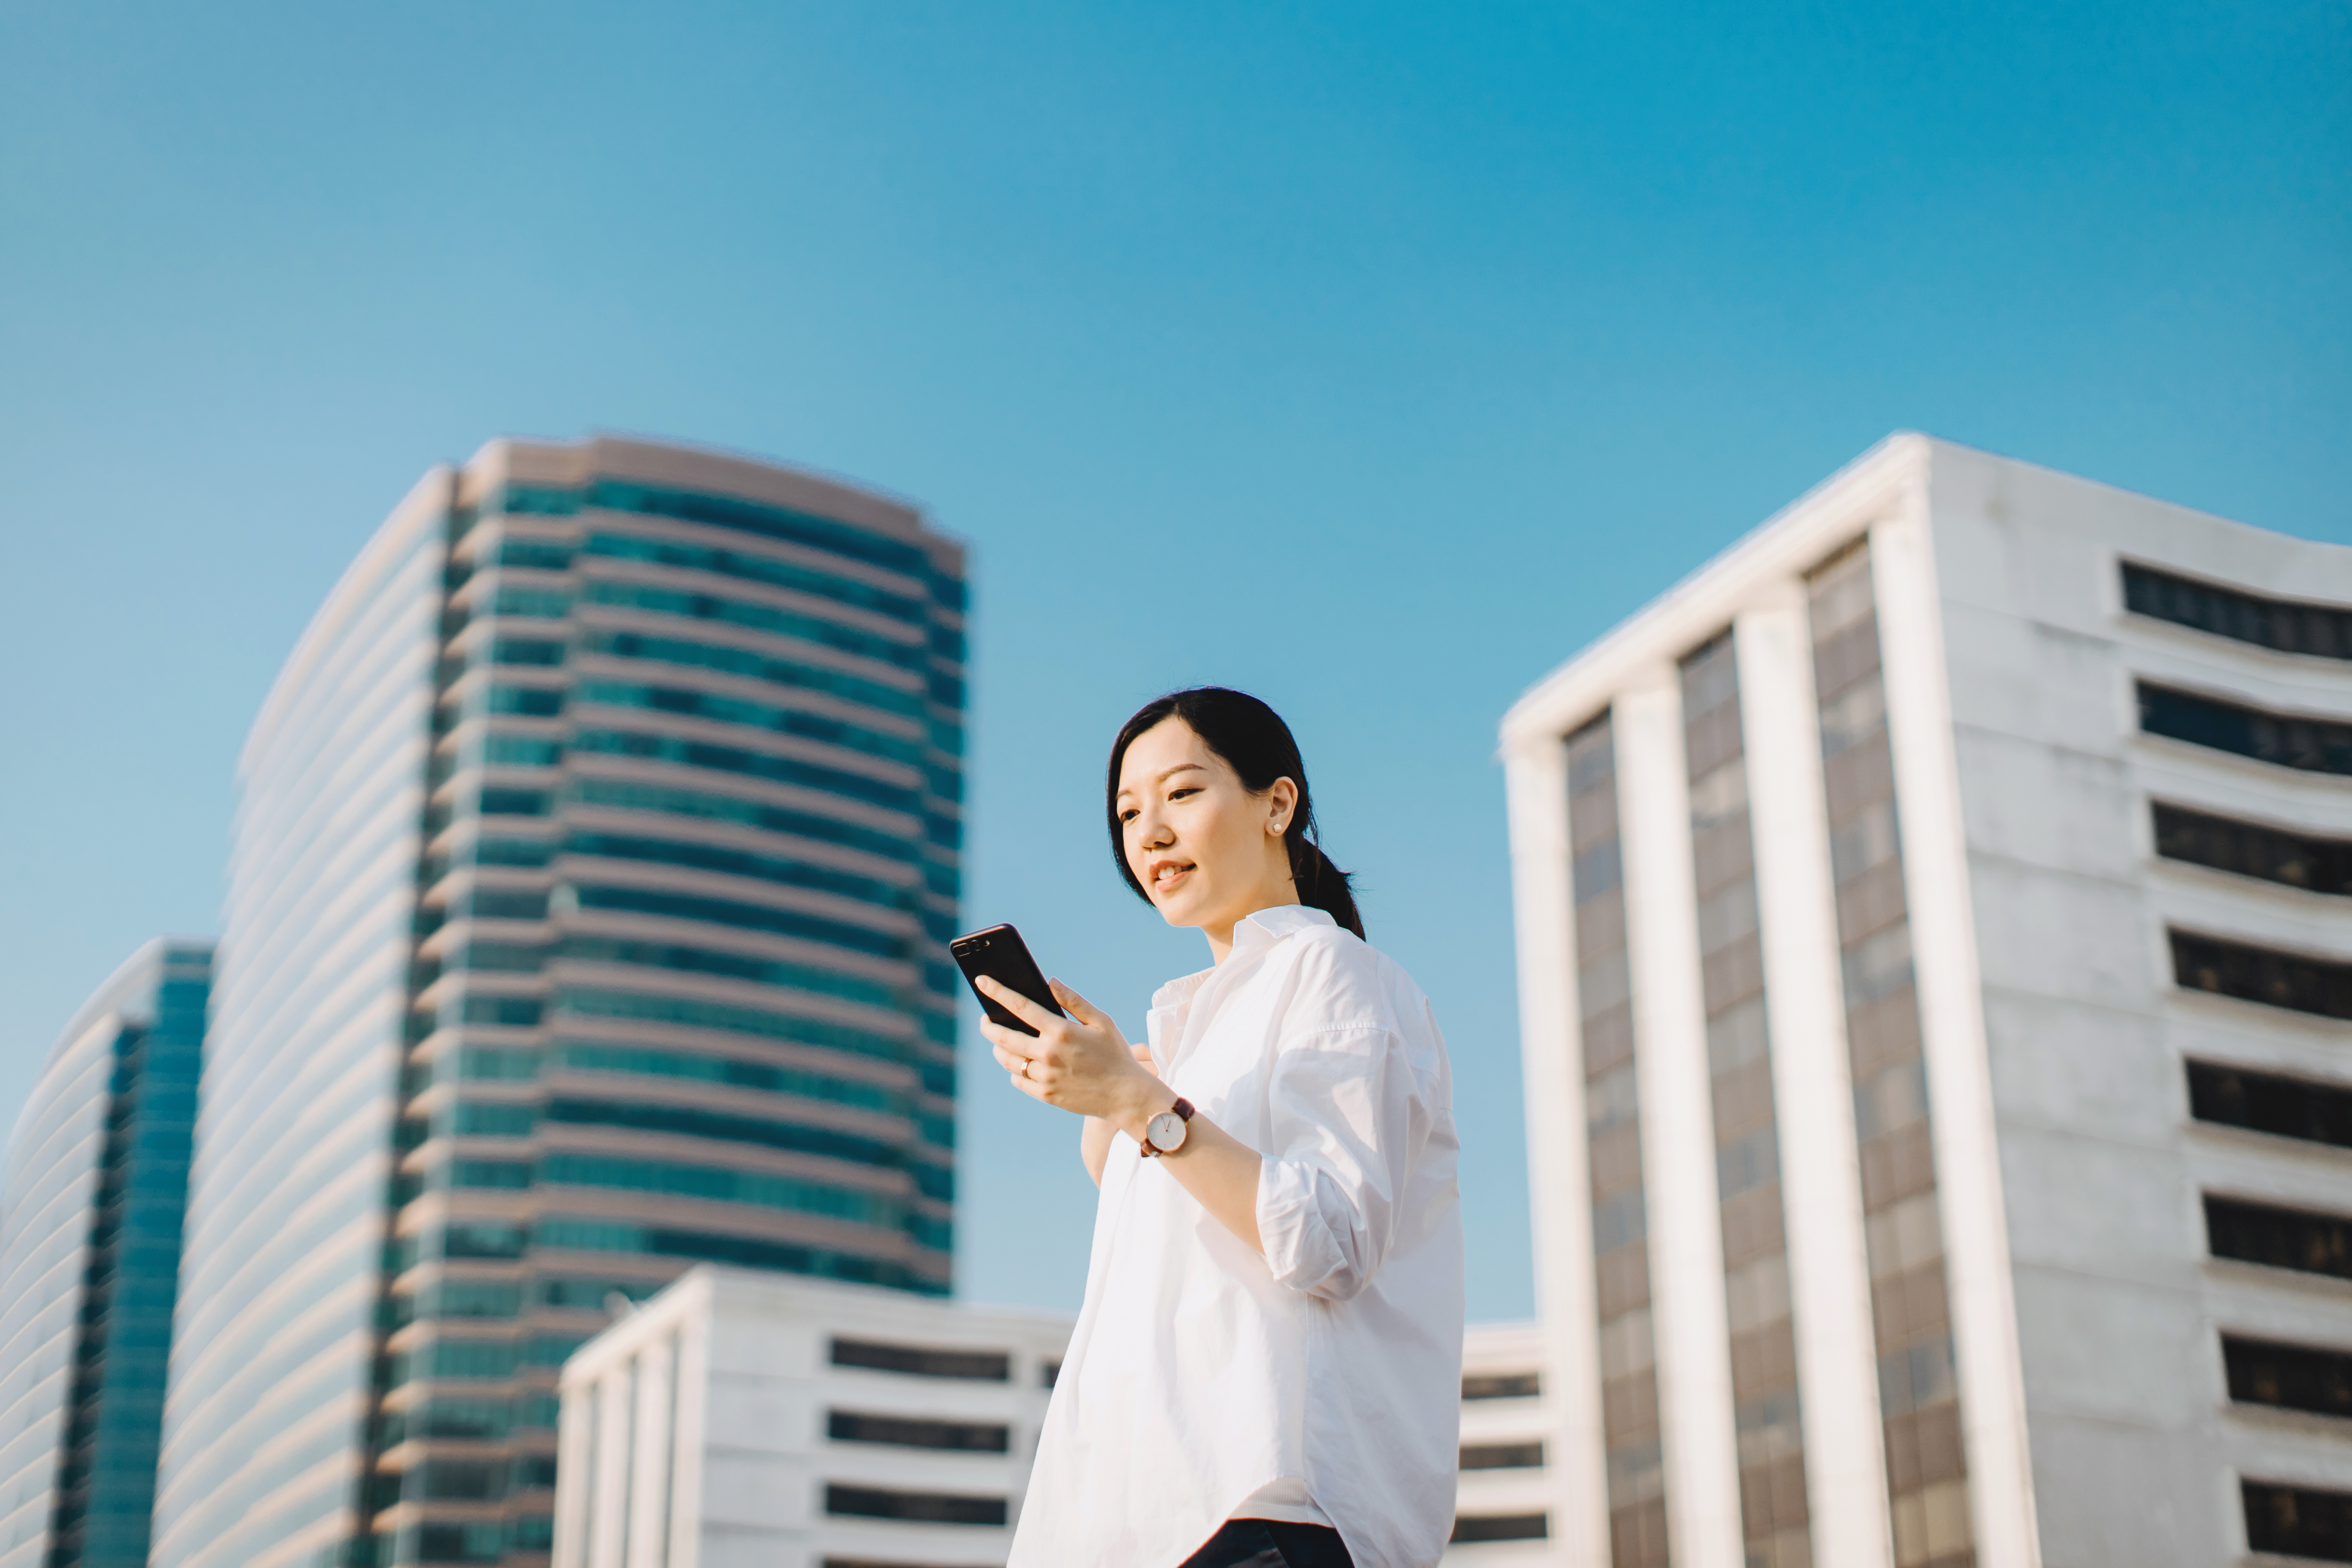 Confident young woman emailing on smartphone in city, against highrise city buildings and clear blue sky